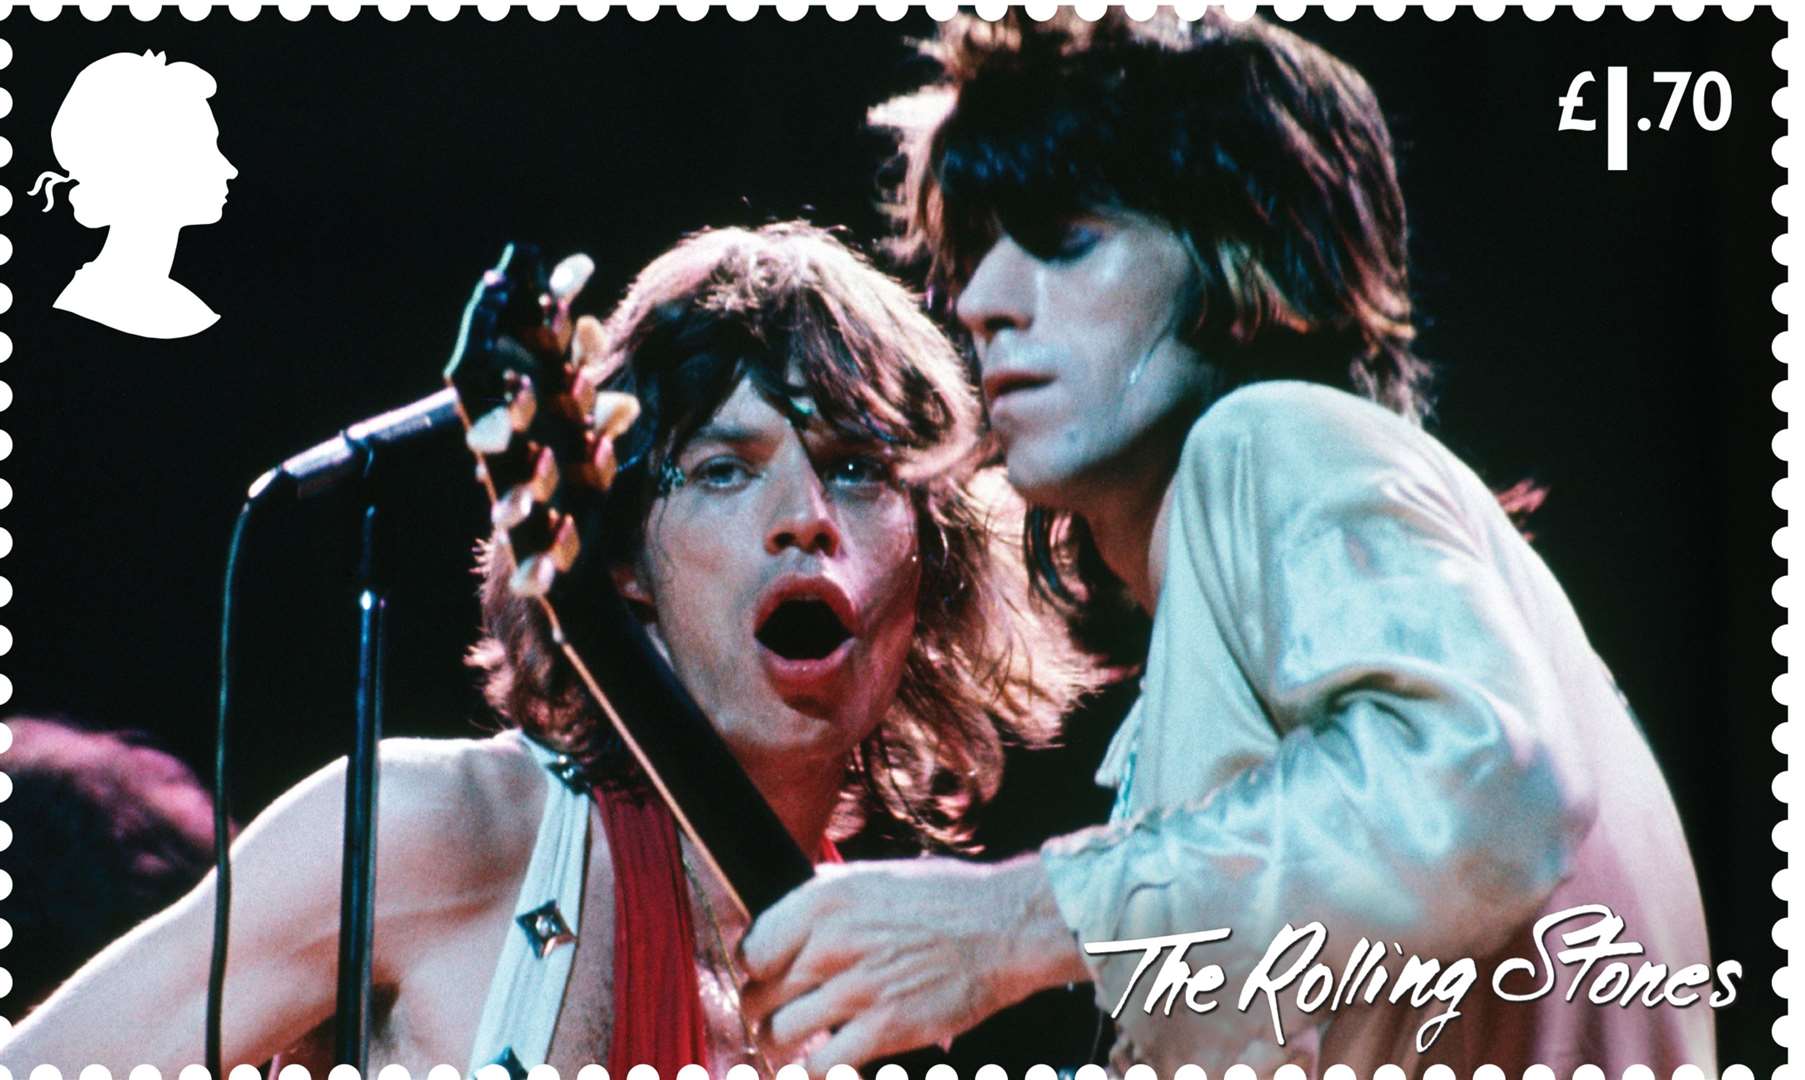 Photographs from concerts around the world have been chosen for the stamps